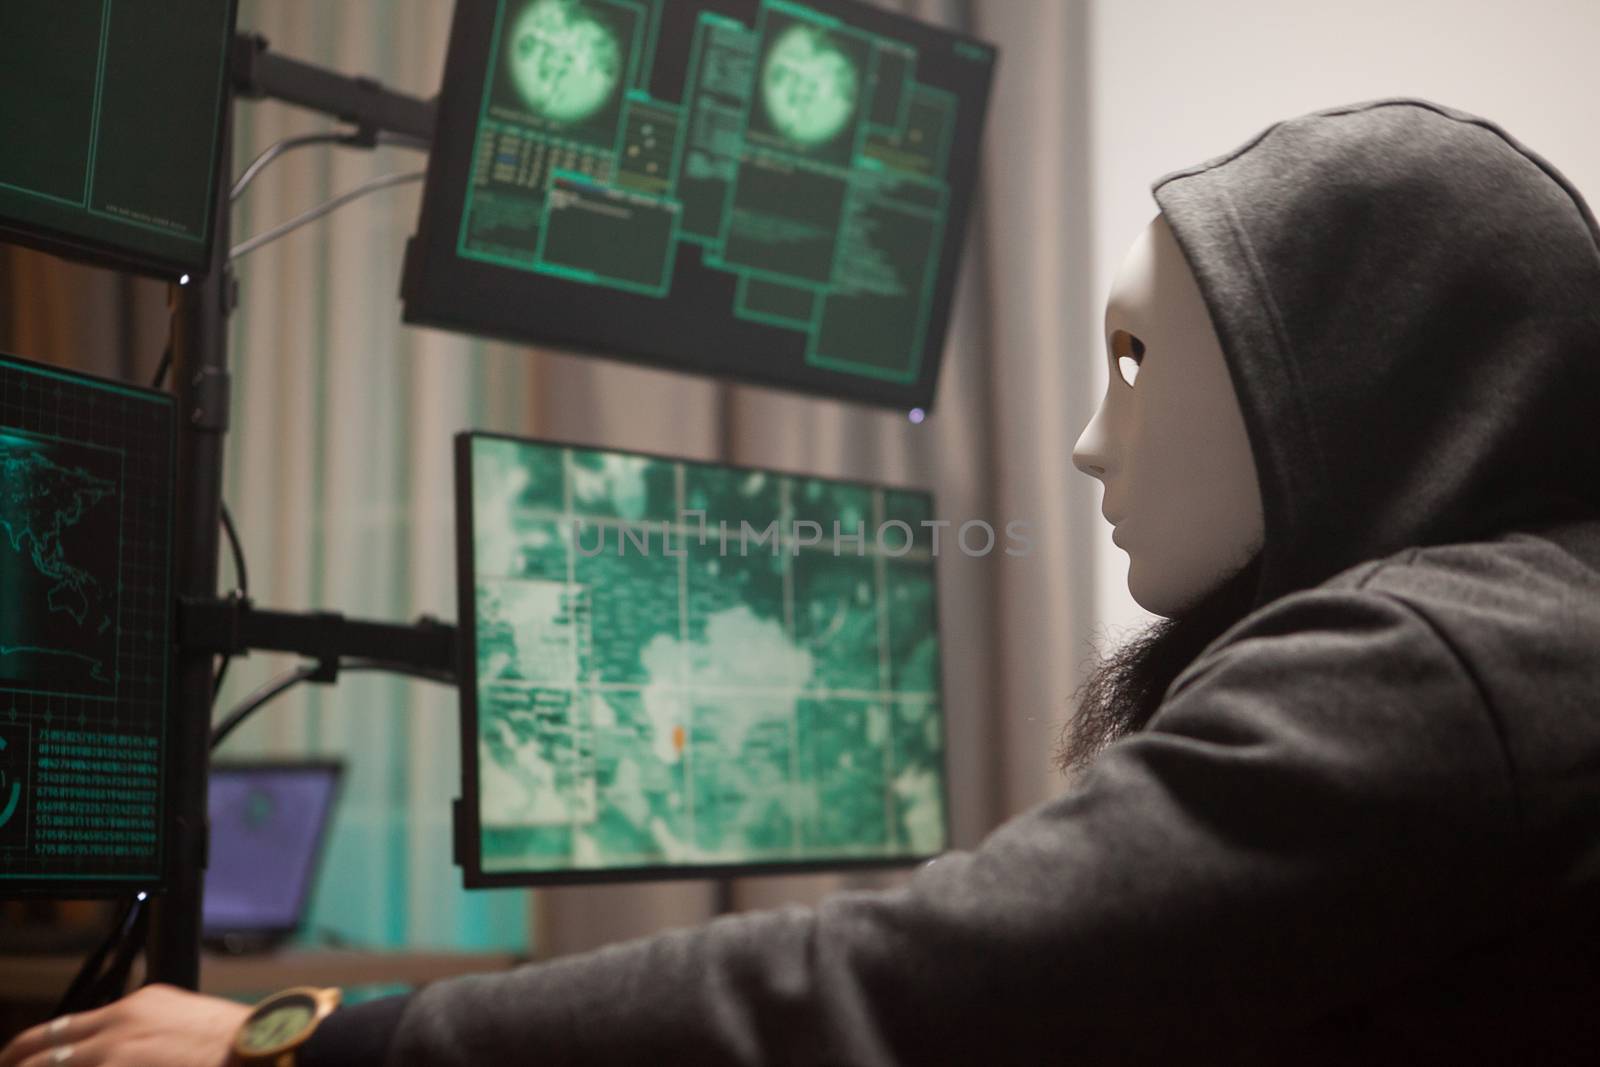 Wanted cyber terrorist wearing a mask to protect his identity while hacking gouvernements servers.